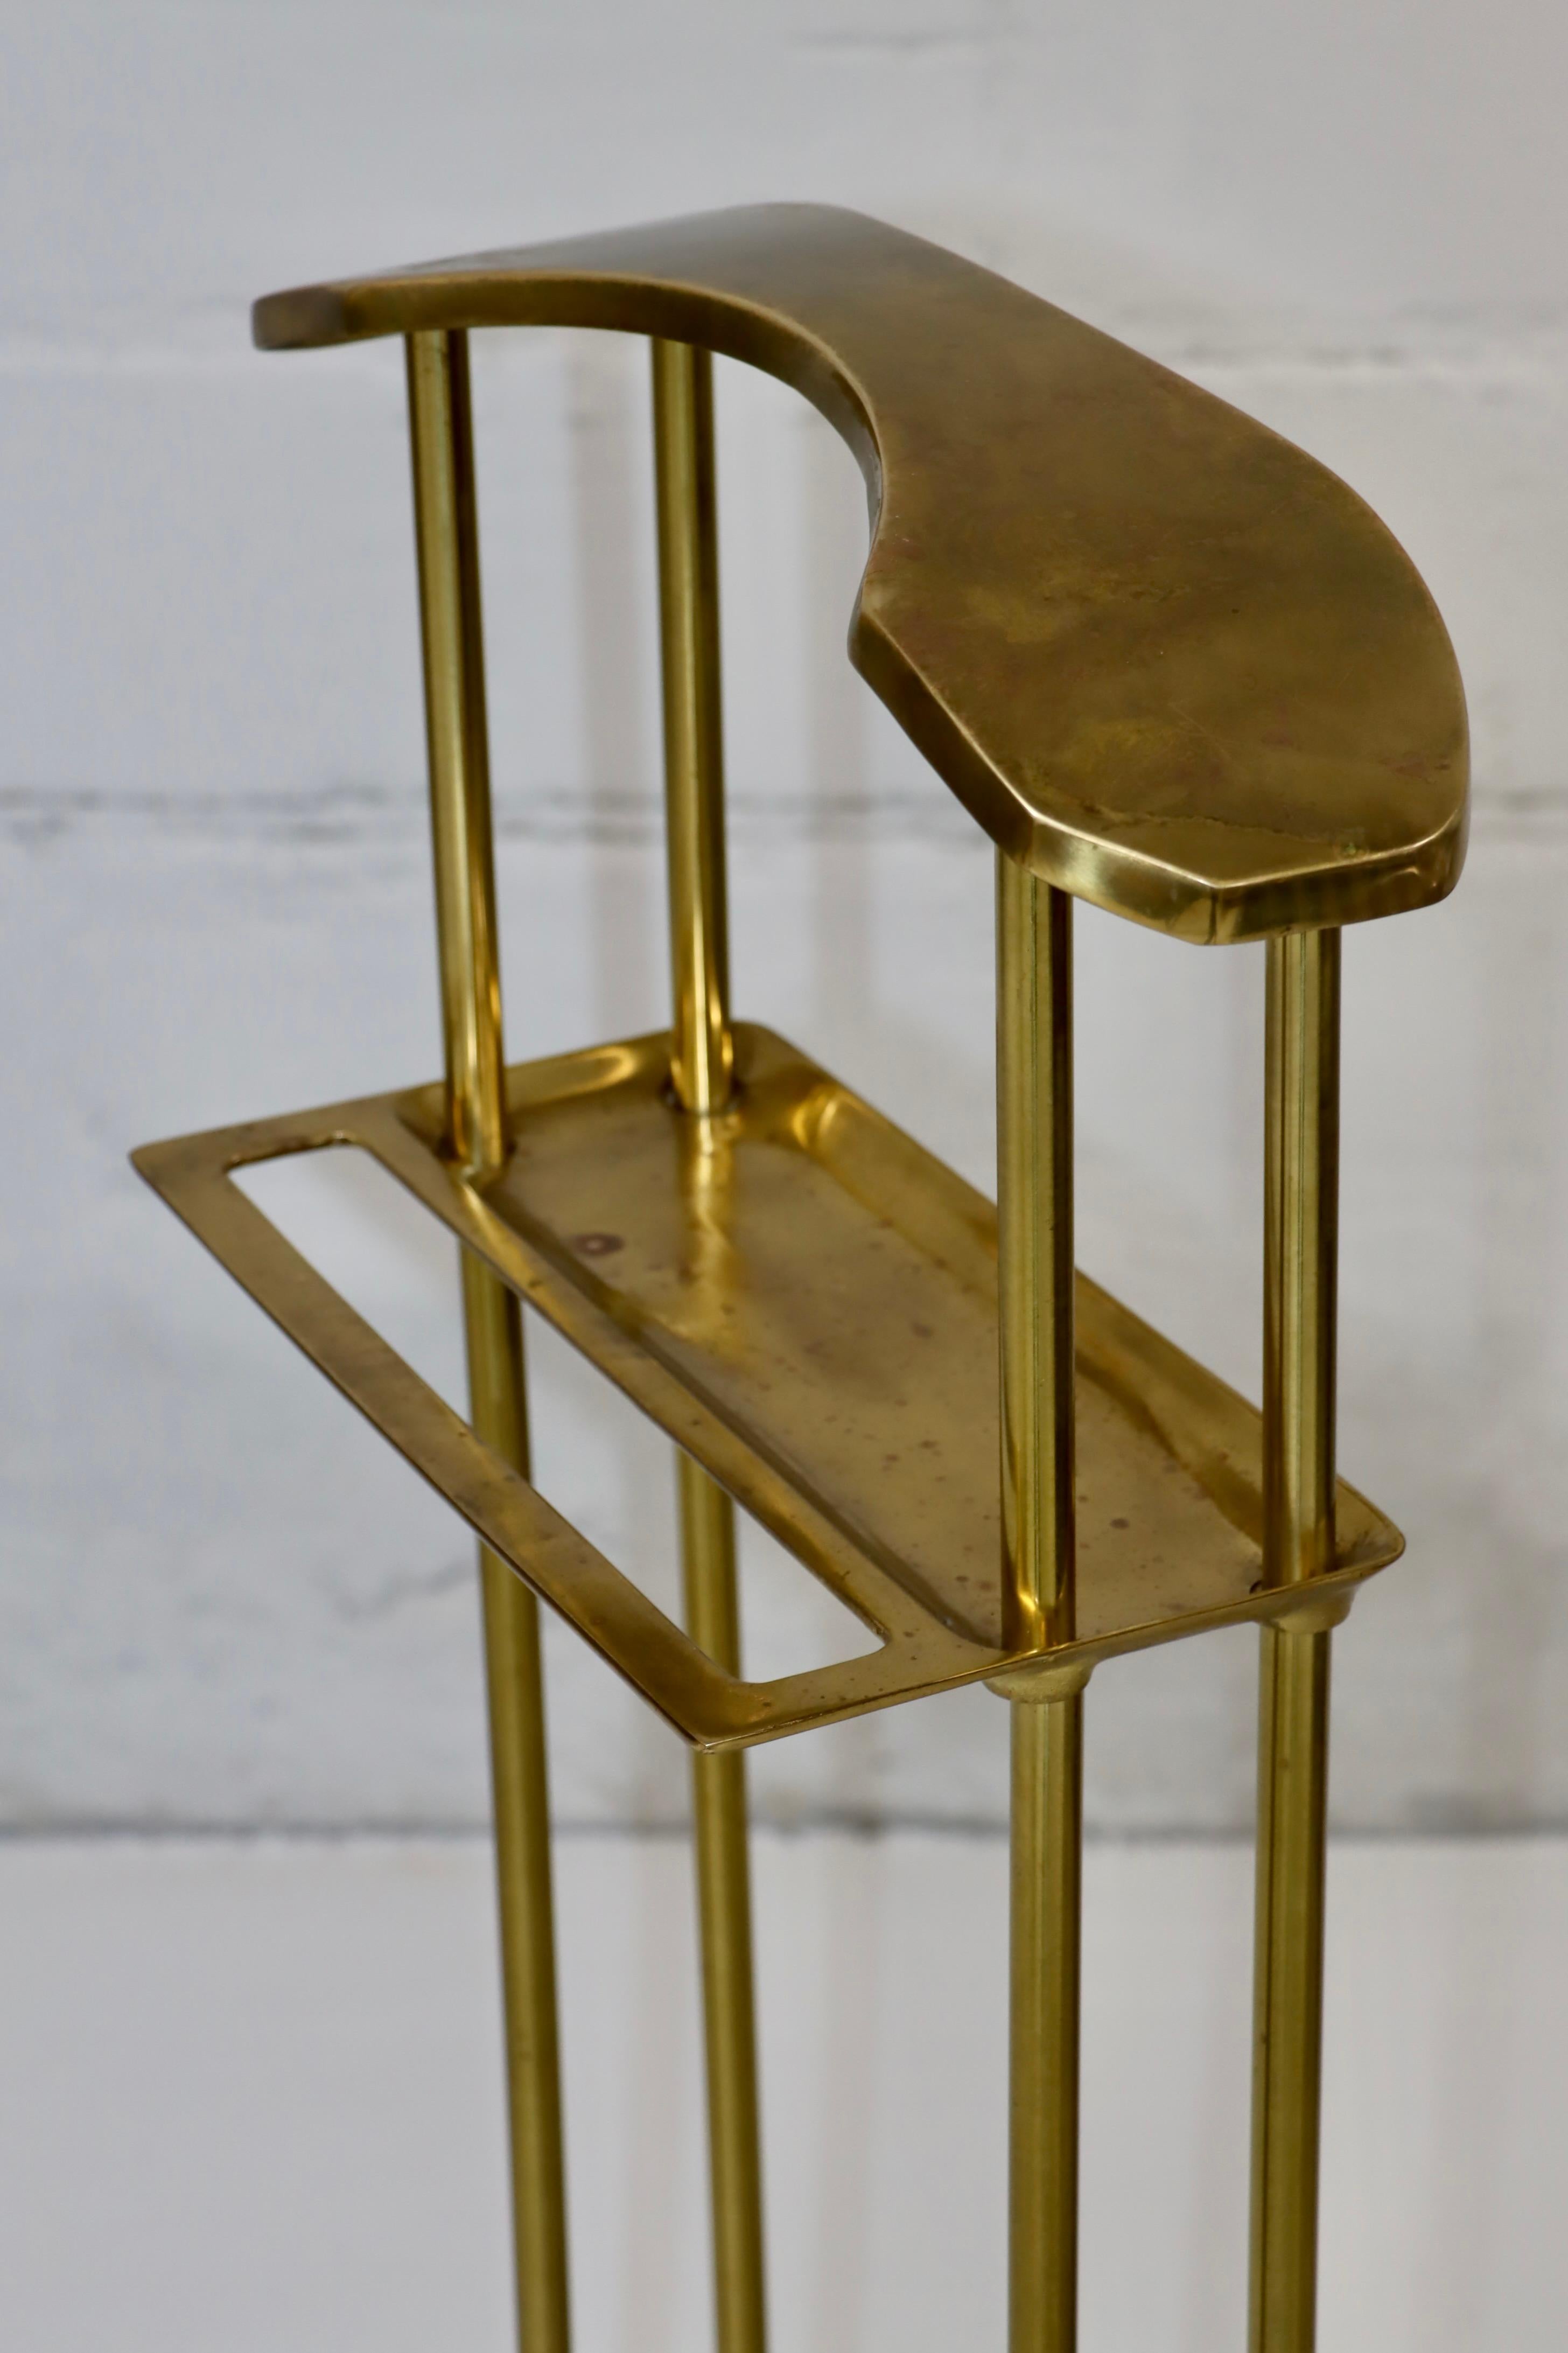 American 1980's Modernist Brass Valet Stand By Decorative Crafts Inc. For Sale